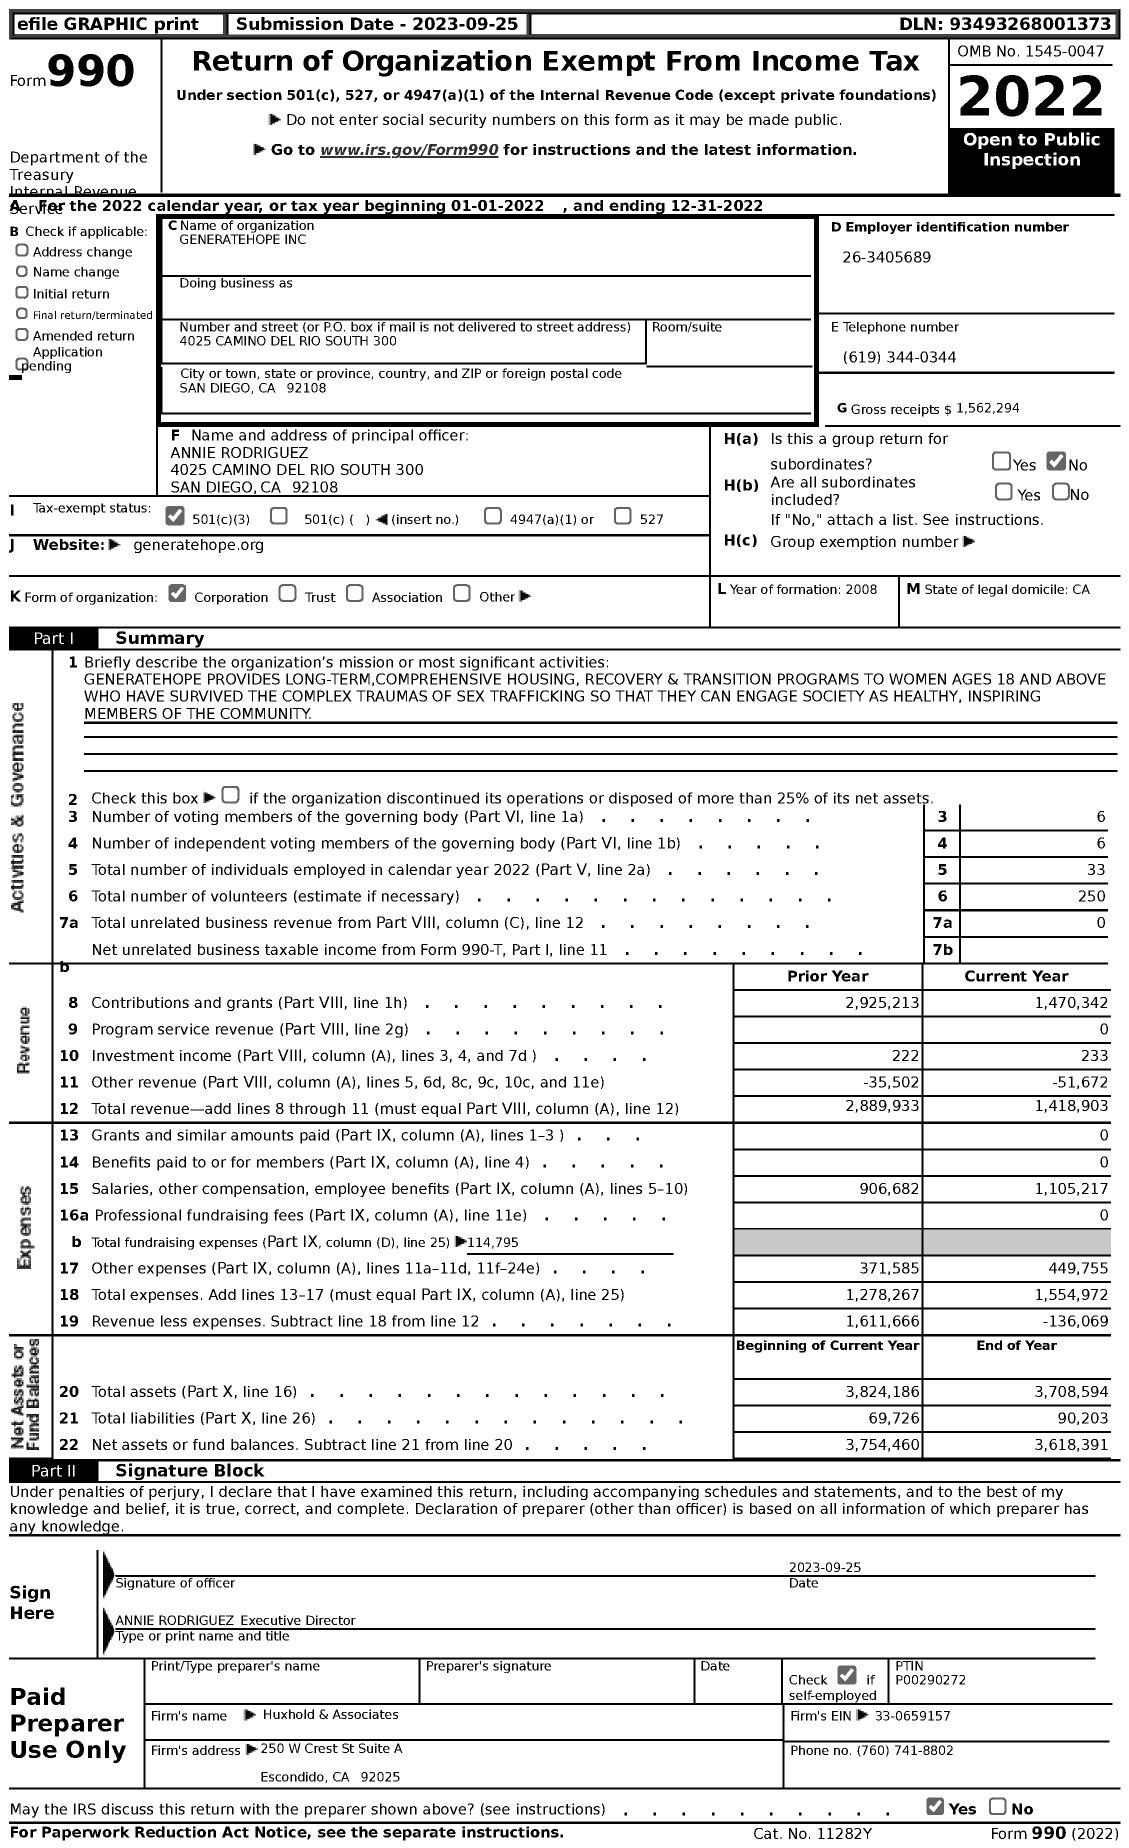 Image of first page of 2022 Form 990 for Generatehope